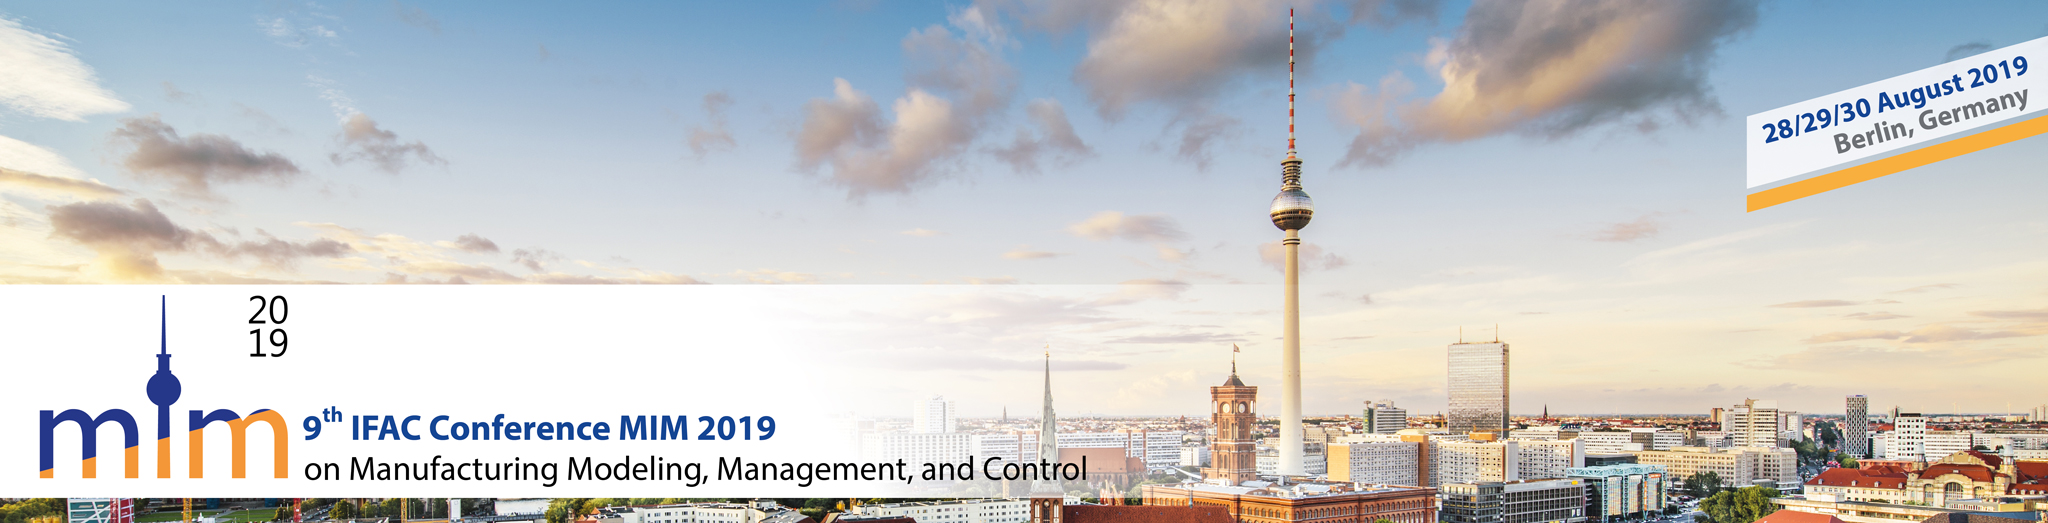 Manufacturing Modelling, Management and Control - 9th MIM 2019™